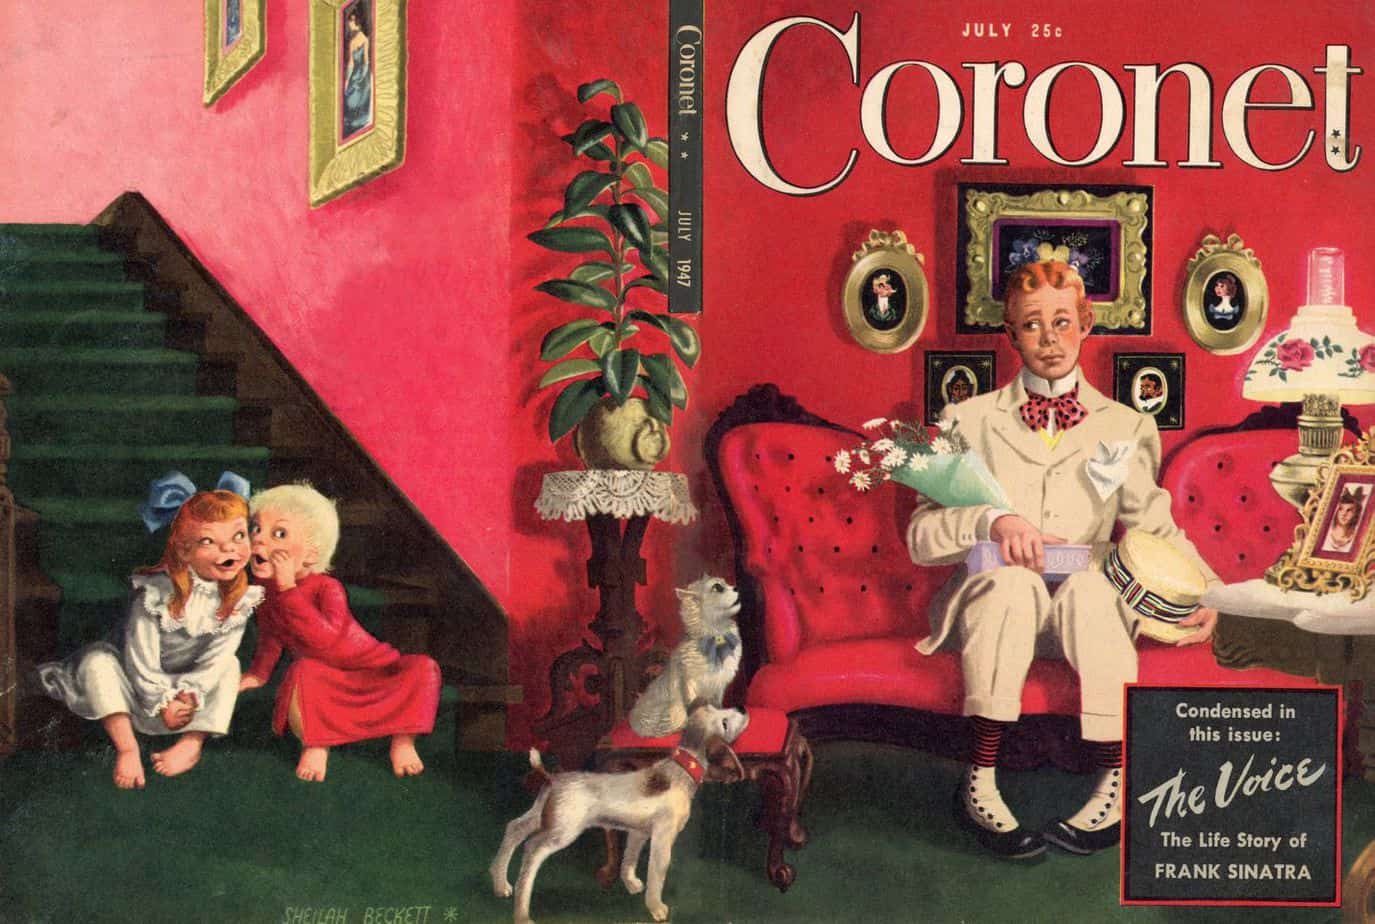 Sheilah Beckett (1913–2013) cover for the July 1947 issue of Coronet stairs